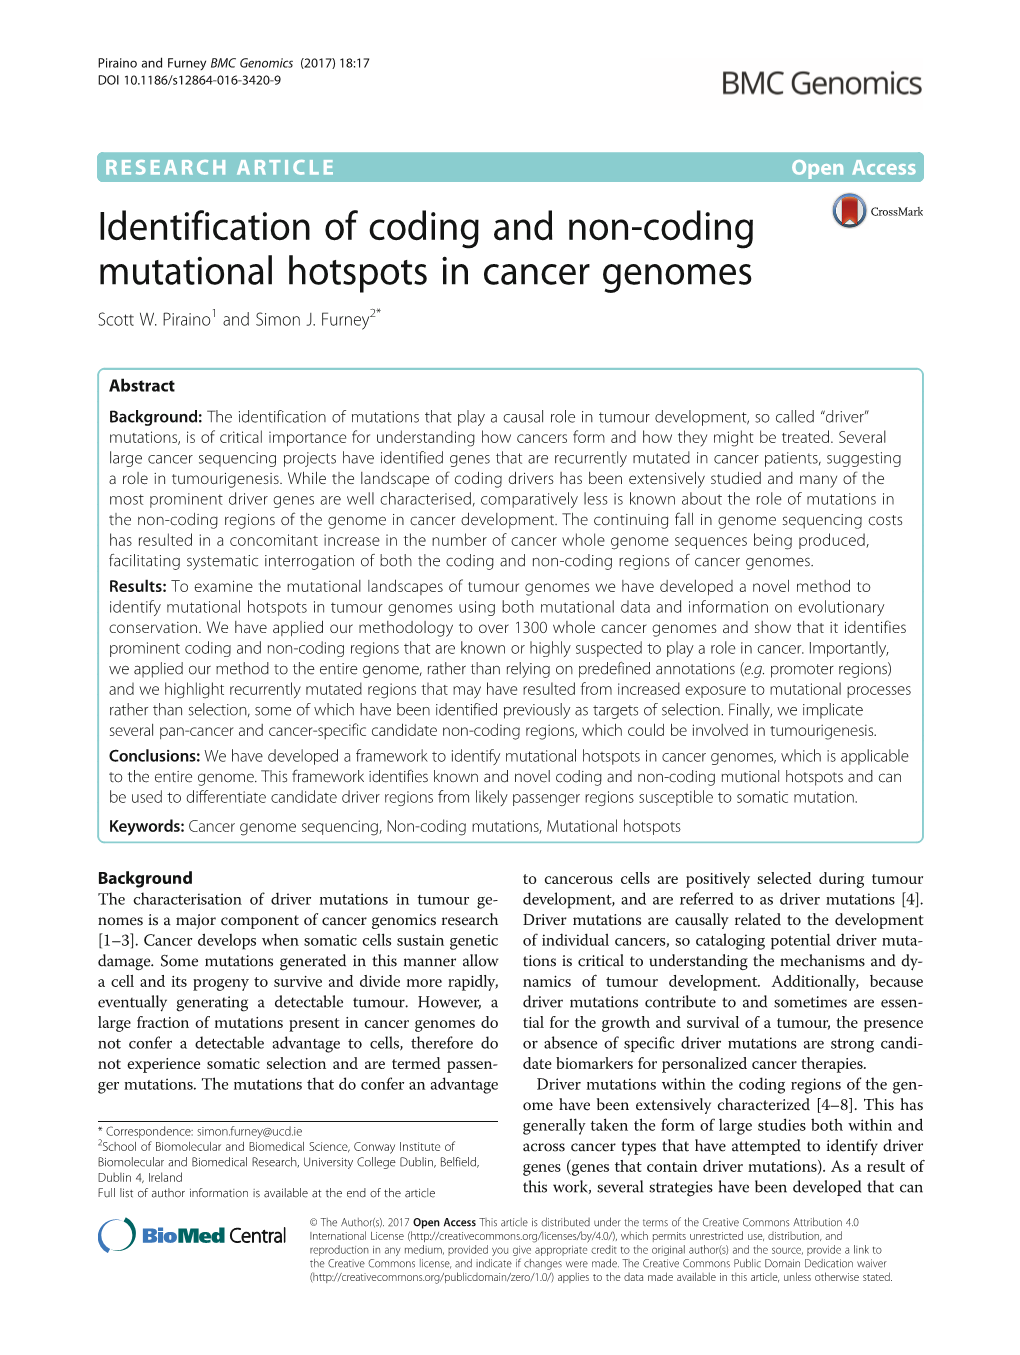 Identification of Coding and Non-Coding Mutational Hotspots in Cancer Genomes Scott W